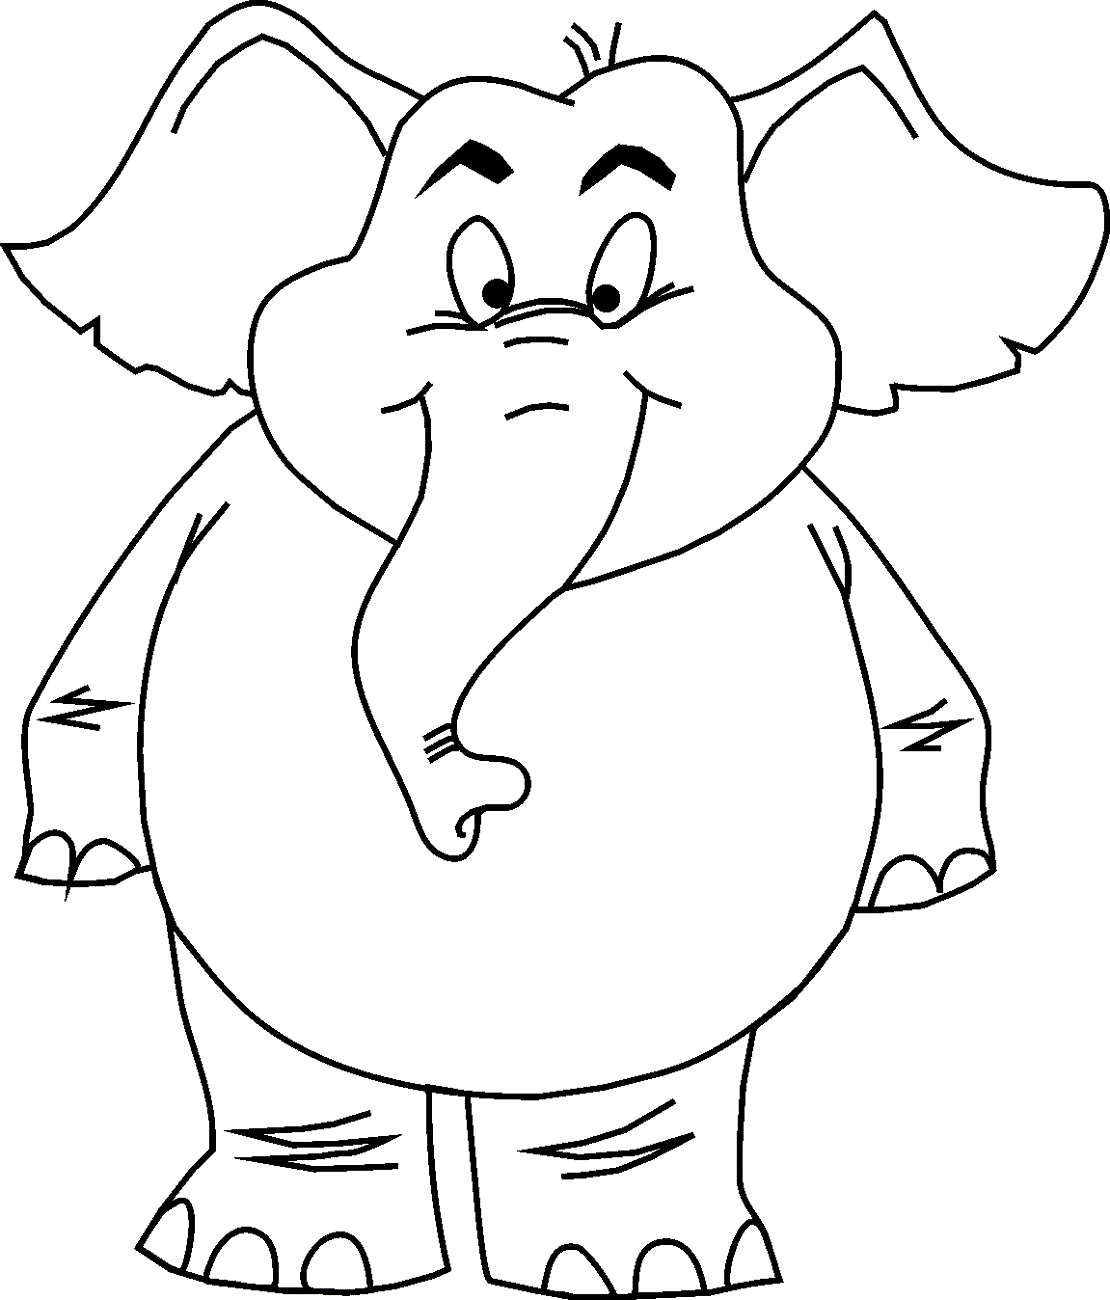 Free Printable Coloring Pages for Toddlers Cartoon